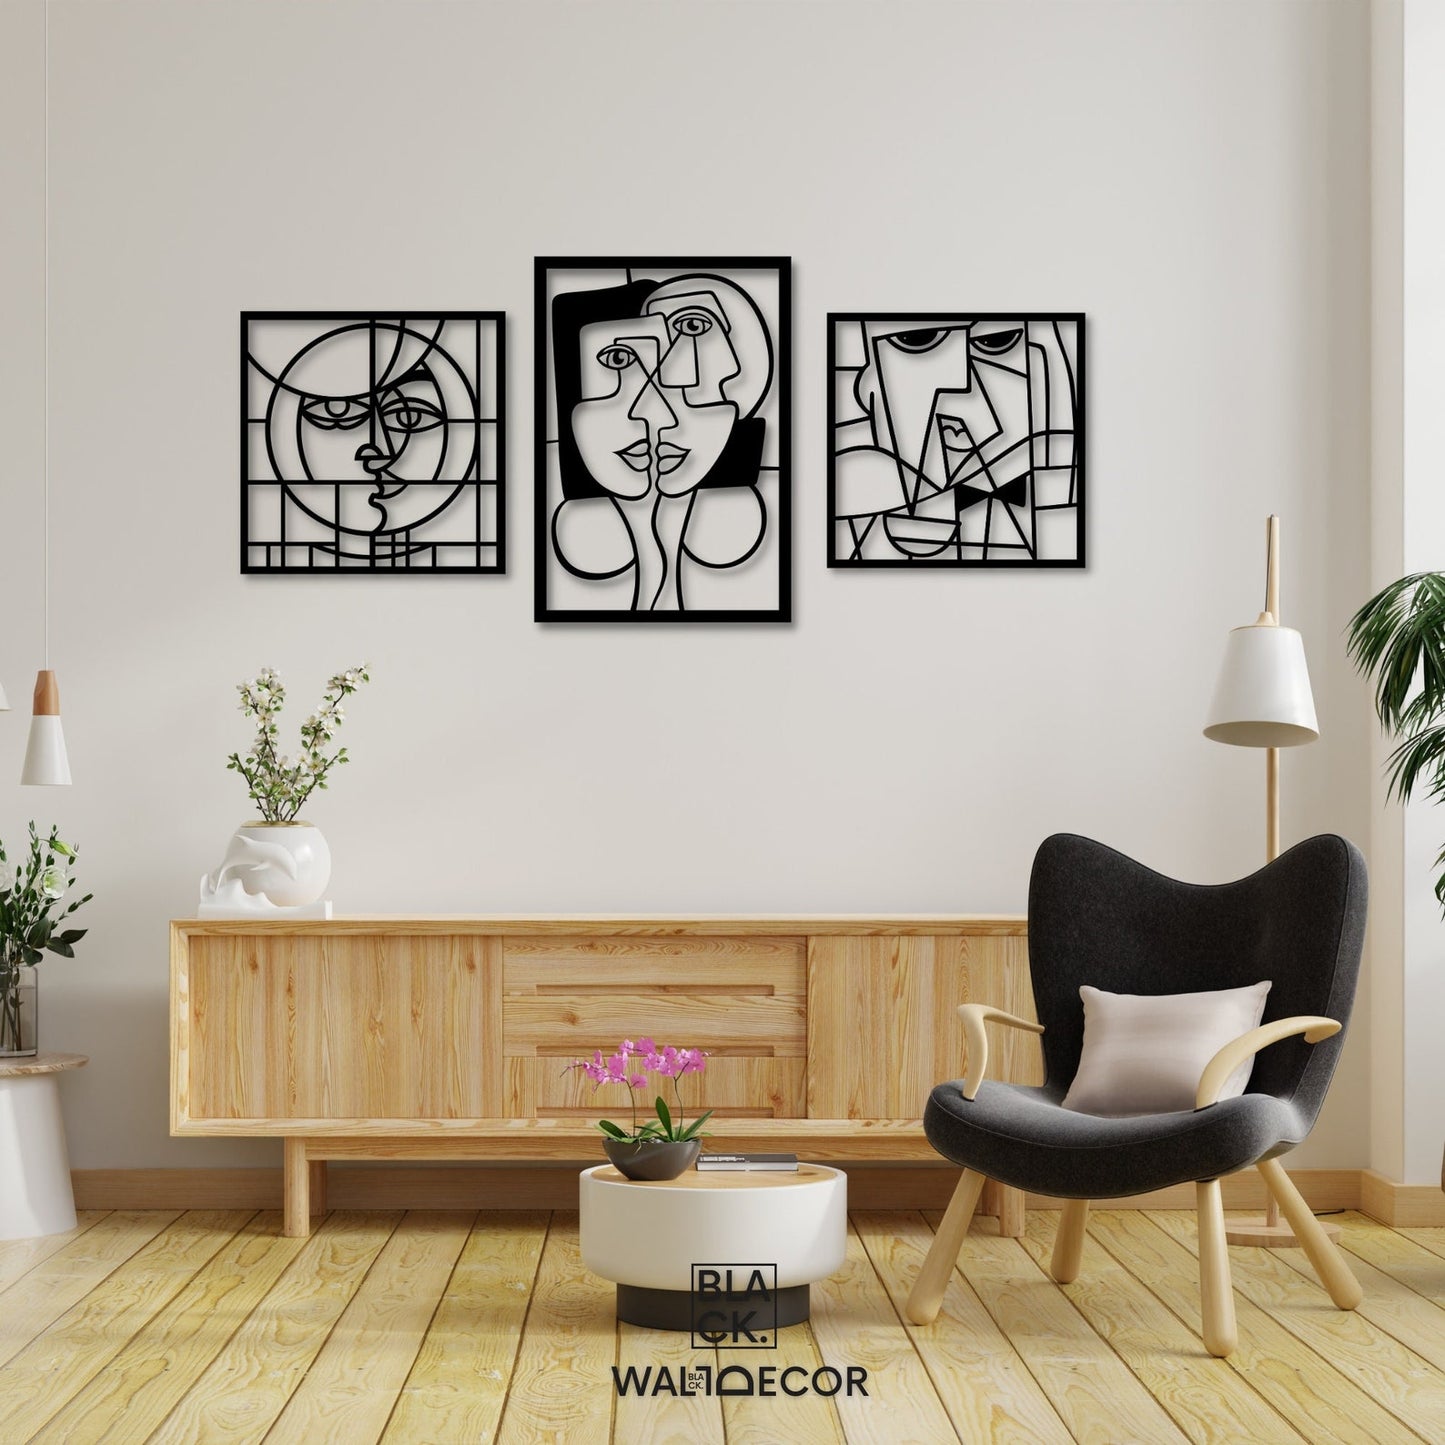 Set of 3 Picasso Wall Art